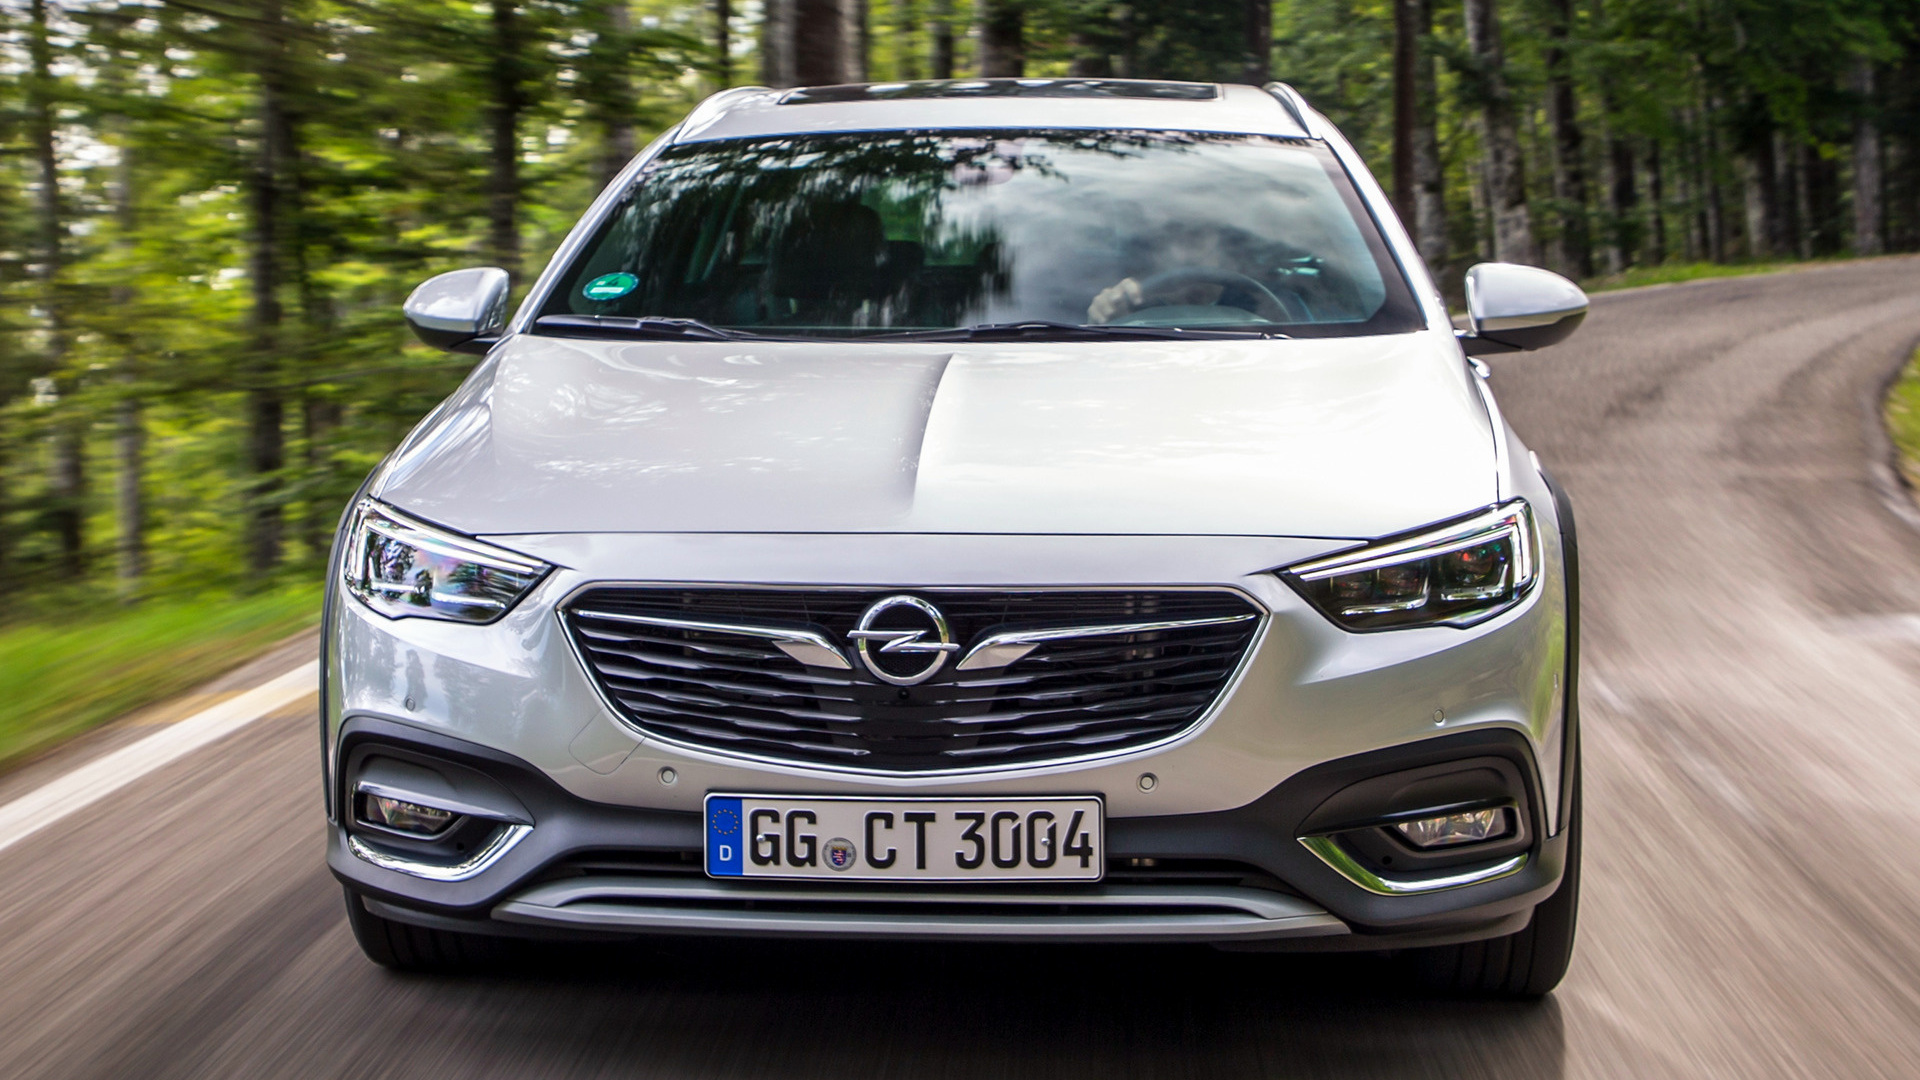 Opel Insignia Country Tourer, High-resolution wallpapers, Luxury car model, Exquisite design, 1920x1080 Full HD Desktop